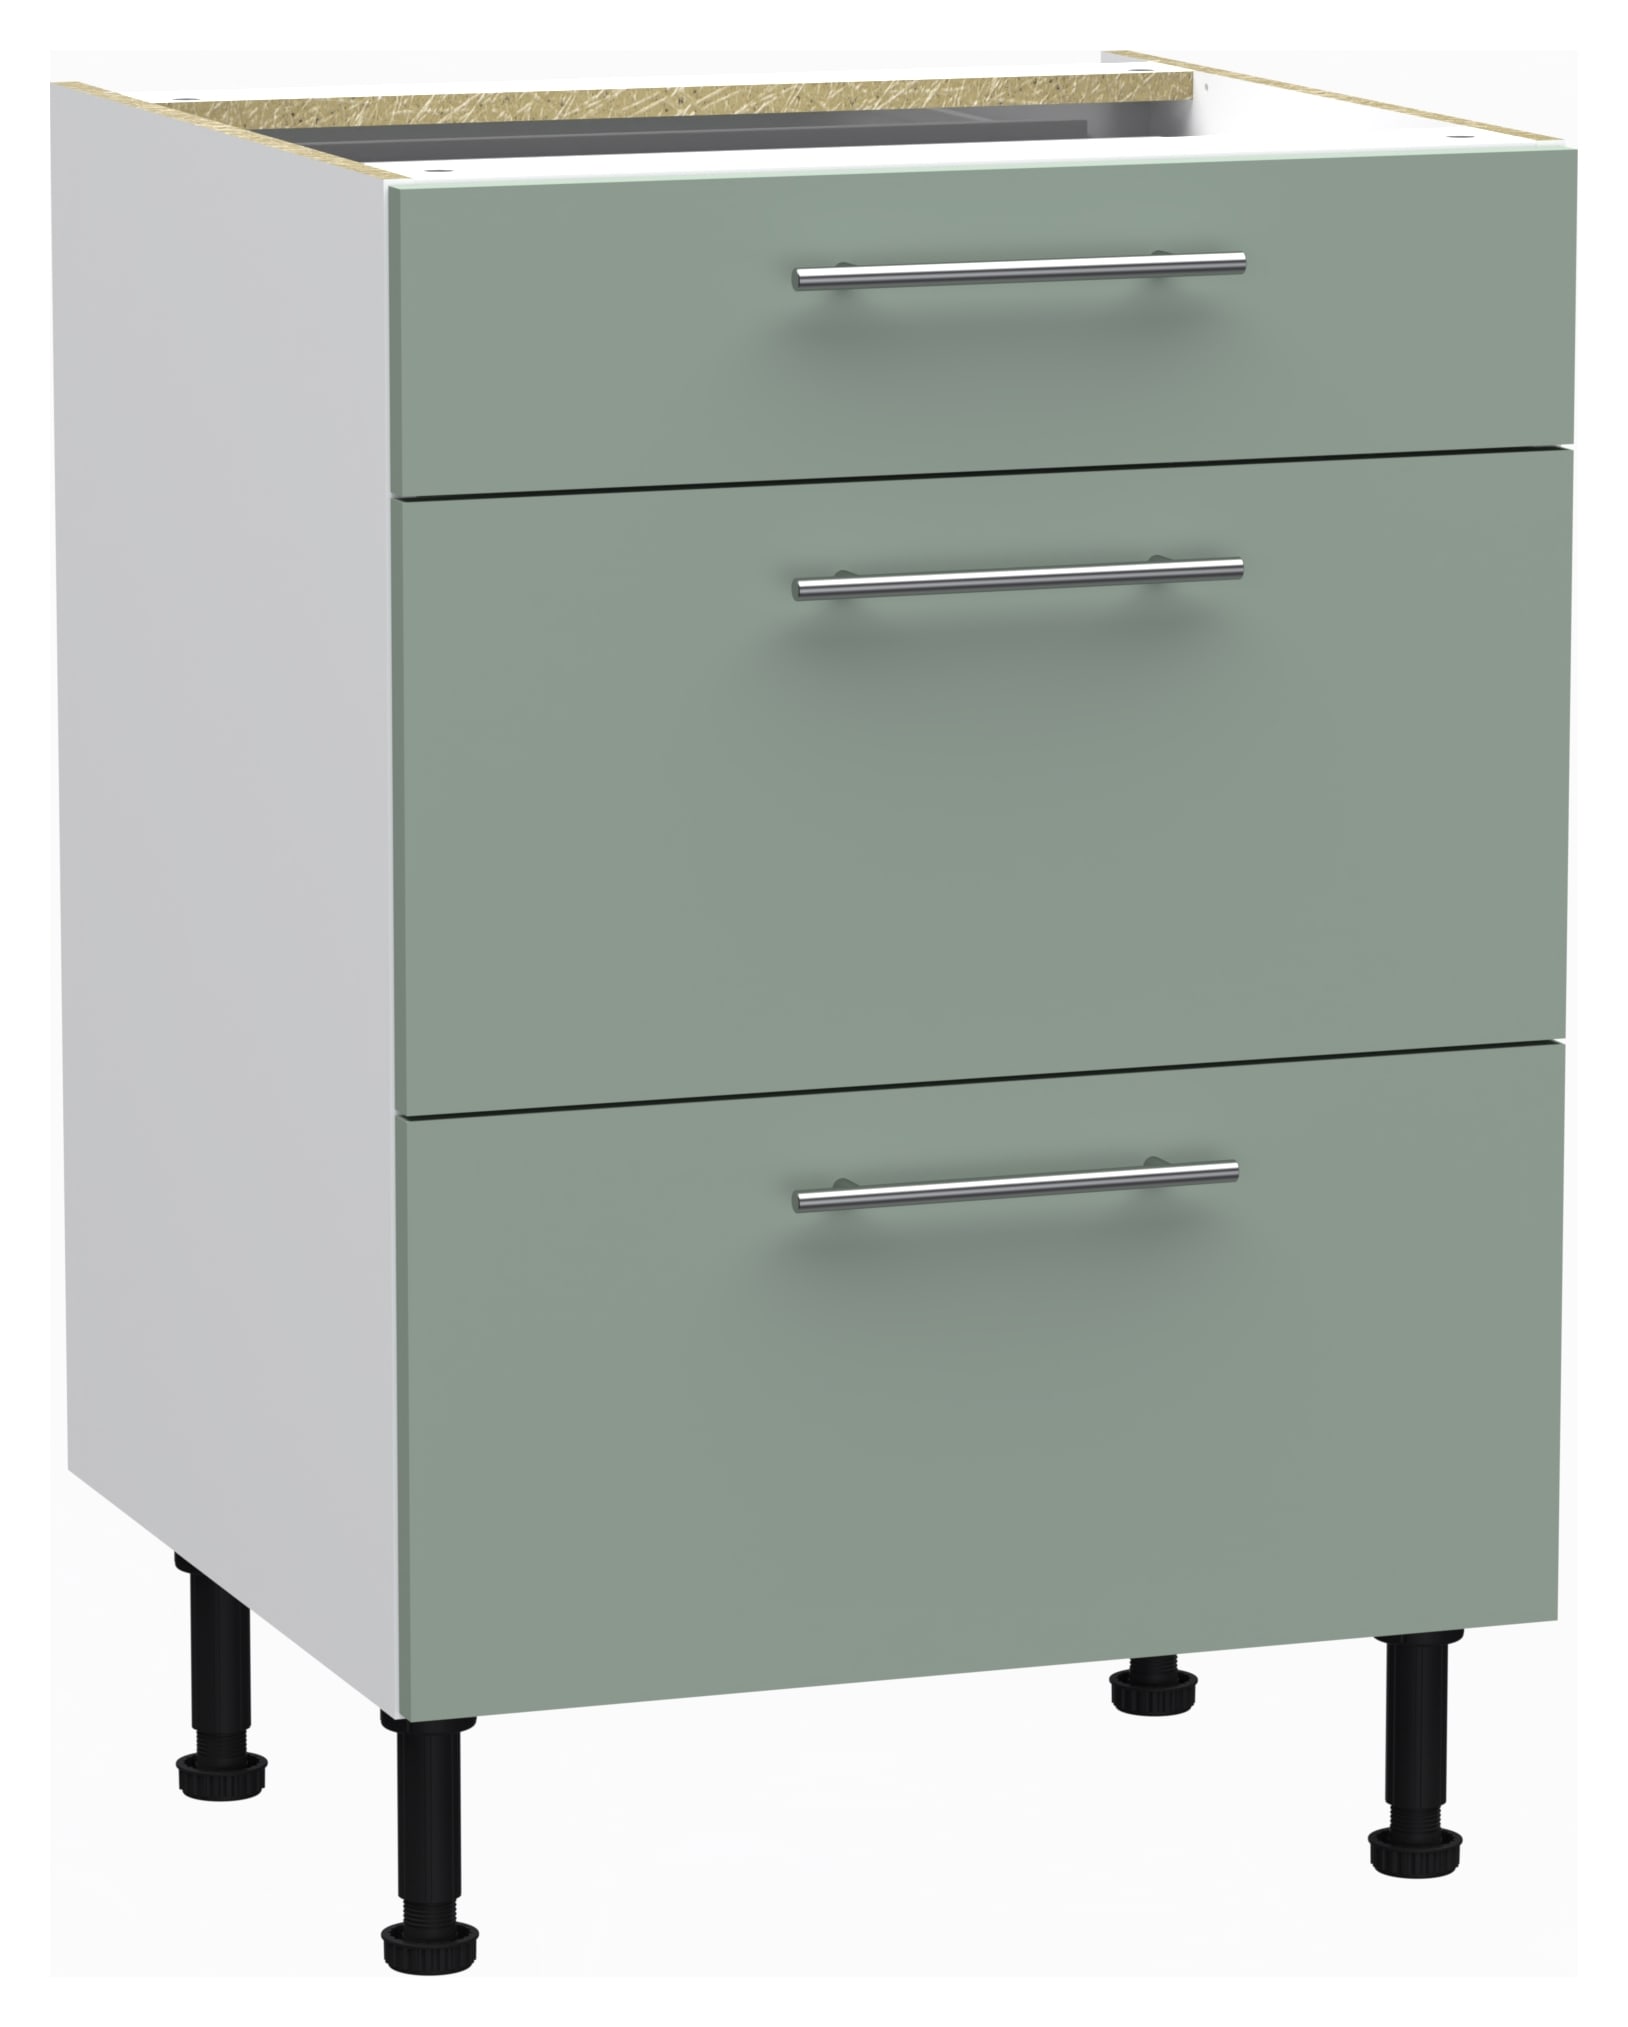 Wickes Orlando Reed Green Drawer Base - 600mm